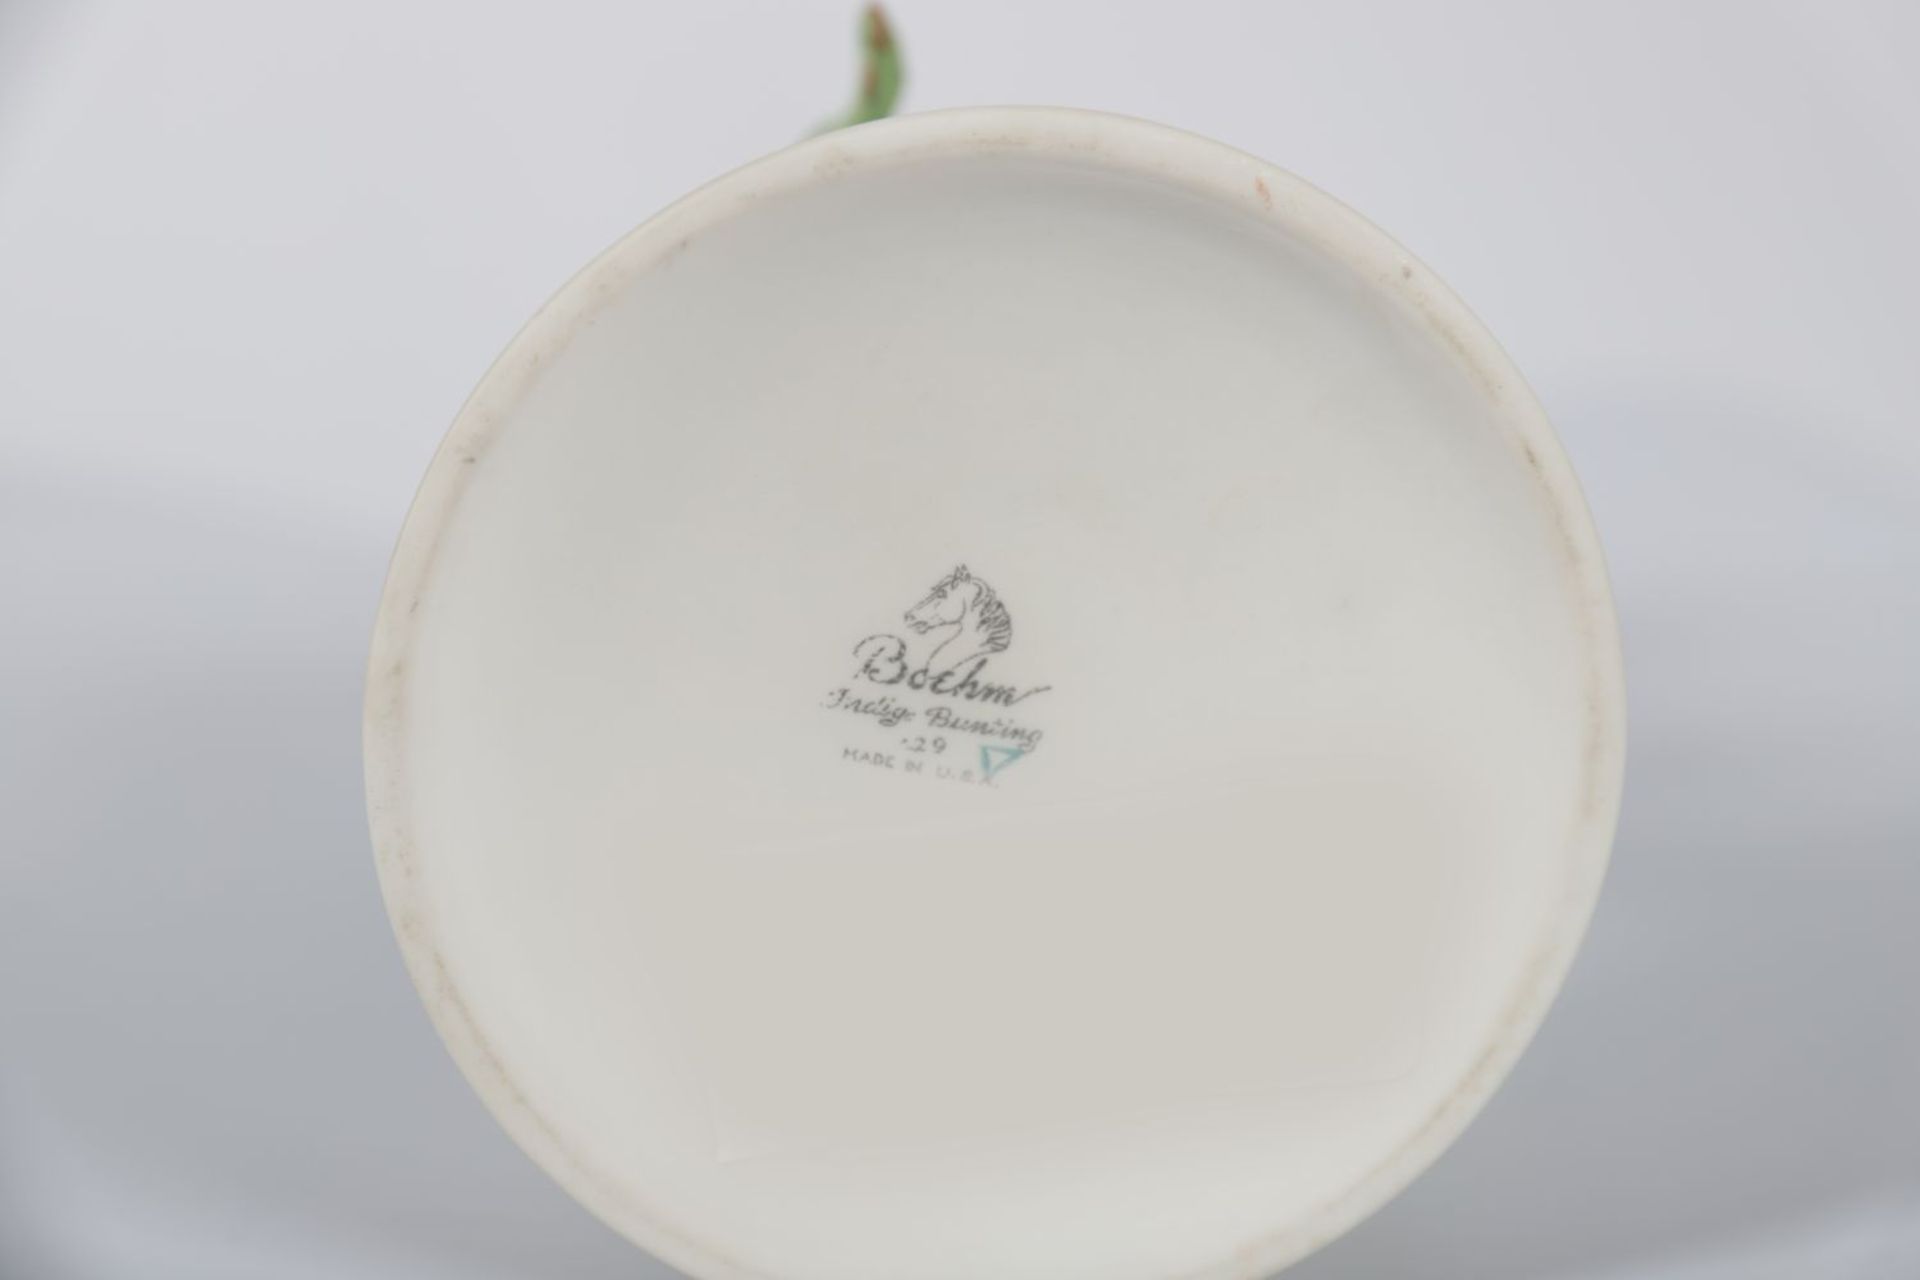 BOEHM BISQUE PORCELAIN BUNTING - Image 3 of 3